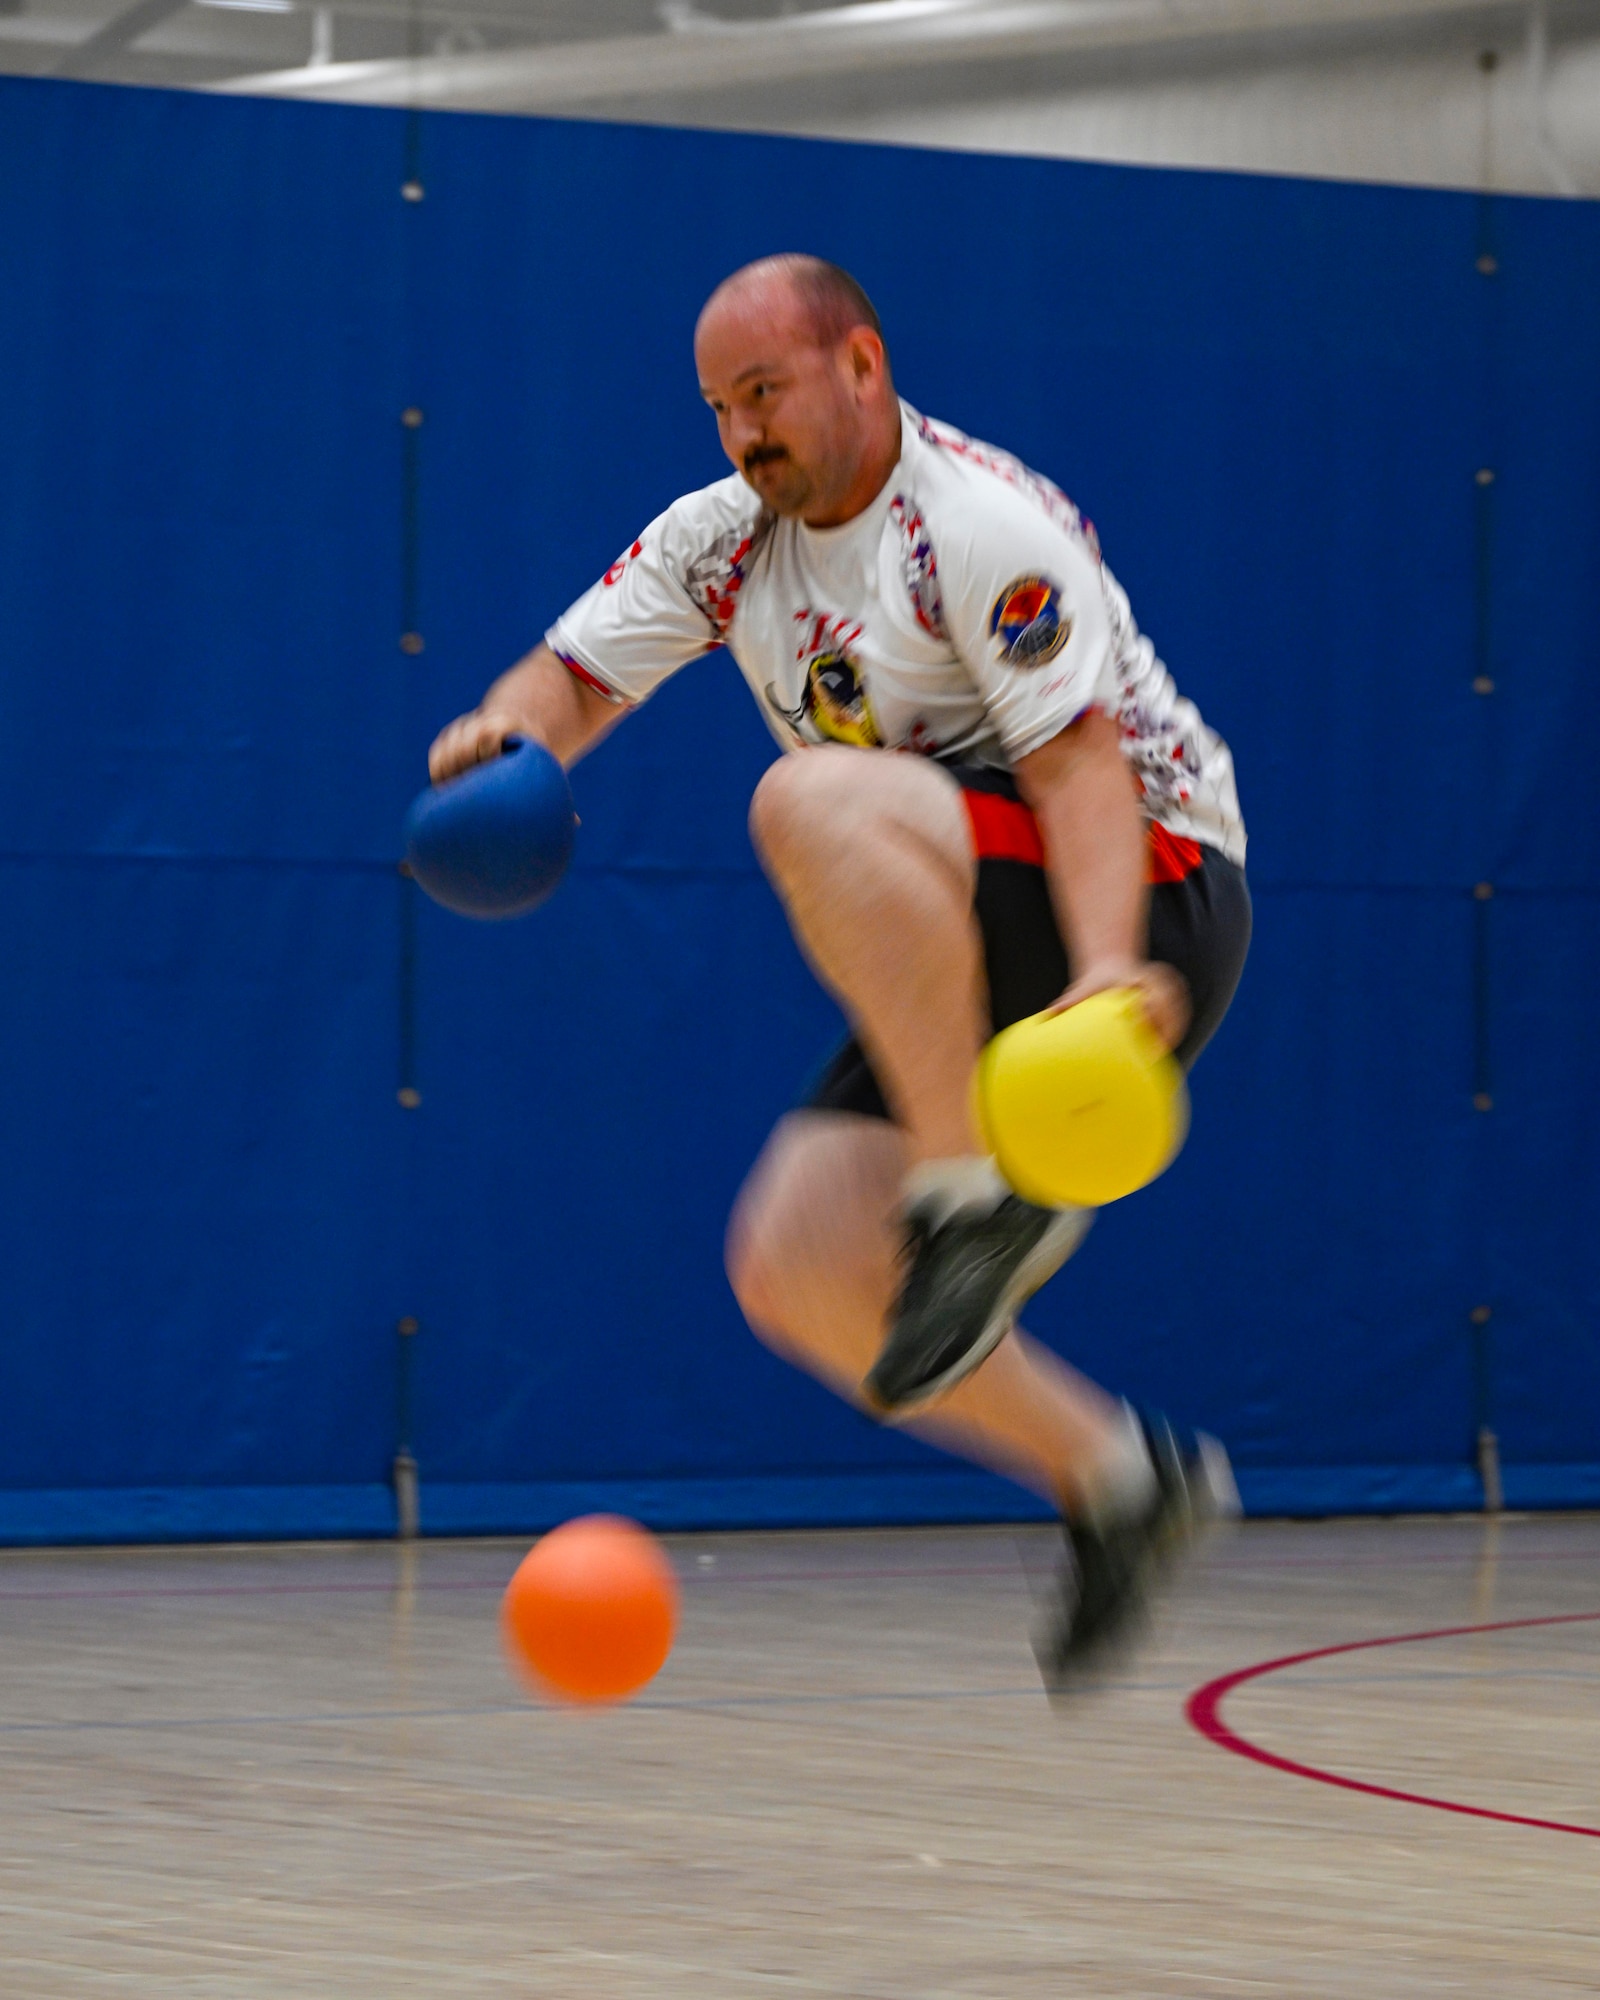 A Team Minot Airman jumps out of the way as a ball is thrown during a dodgeball game at the Summer Games at Minot Air Force Base, North Dakota, Aug. 25, 2023. During the Summer Games, units from across the wing are encouraged to participate in morale activities such as basketball, soccer, or kickball. (U.S. Air Force photo by Senior Airman Caleb Kimmell)